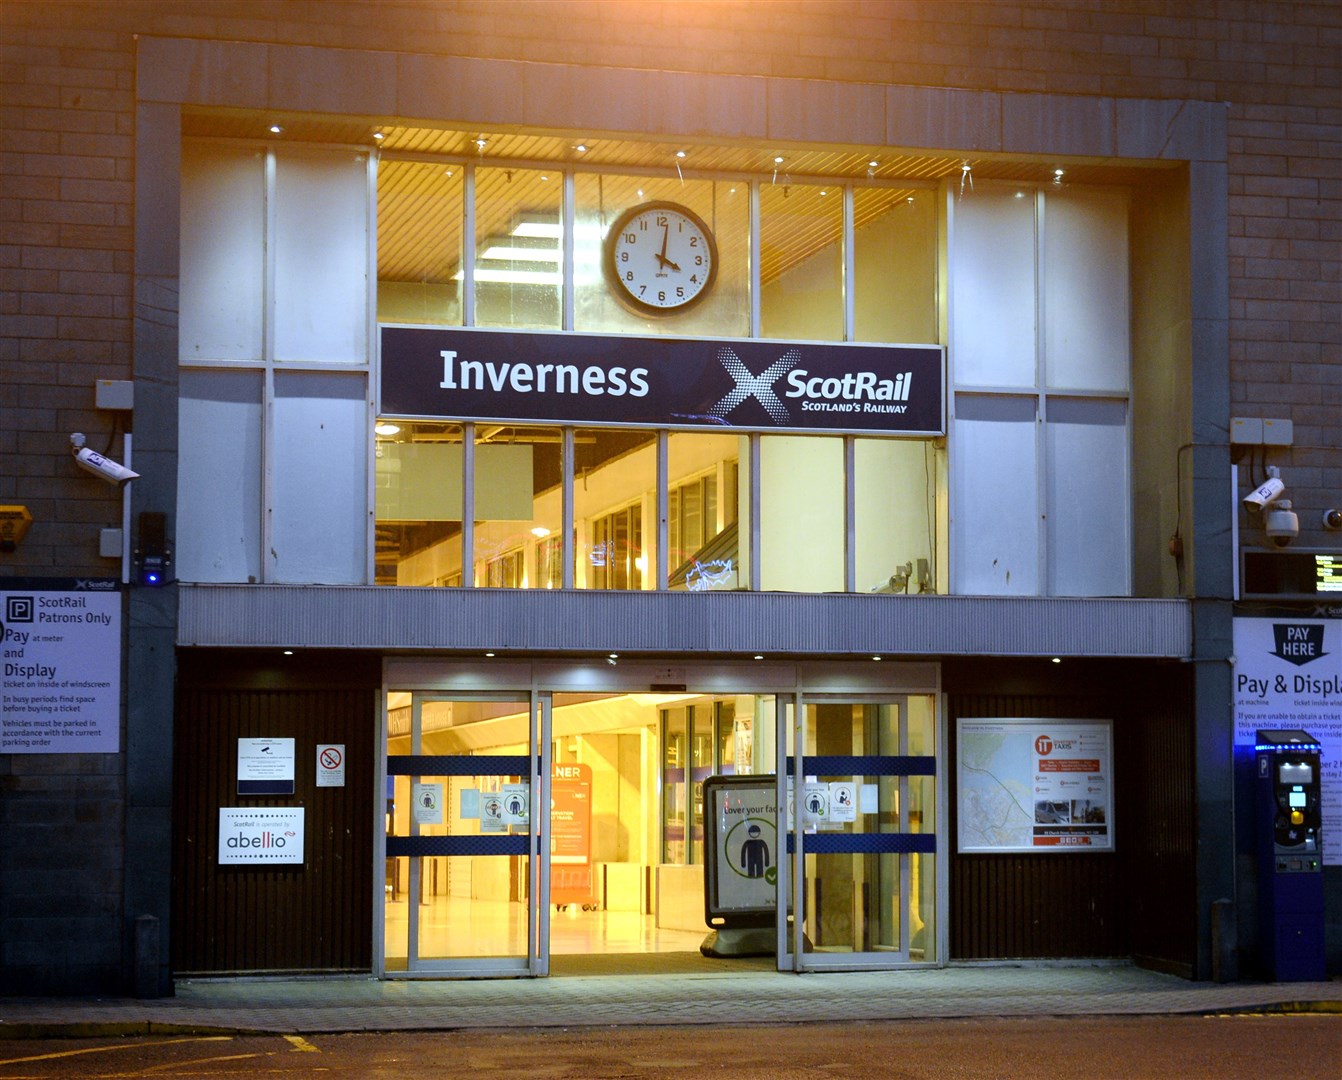 It had been suggested changes to platforms could boost flexibility at Inverness railway station.